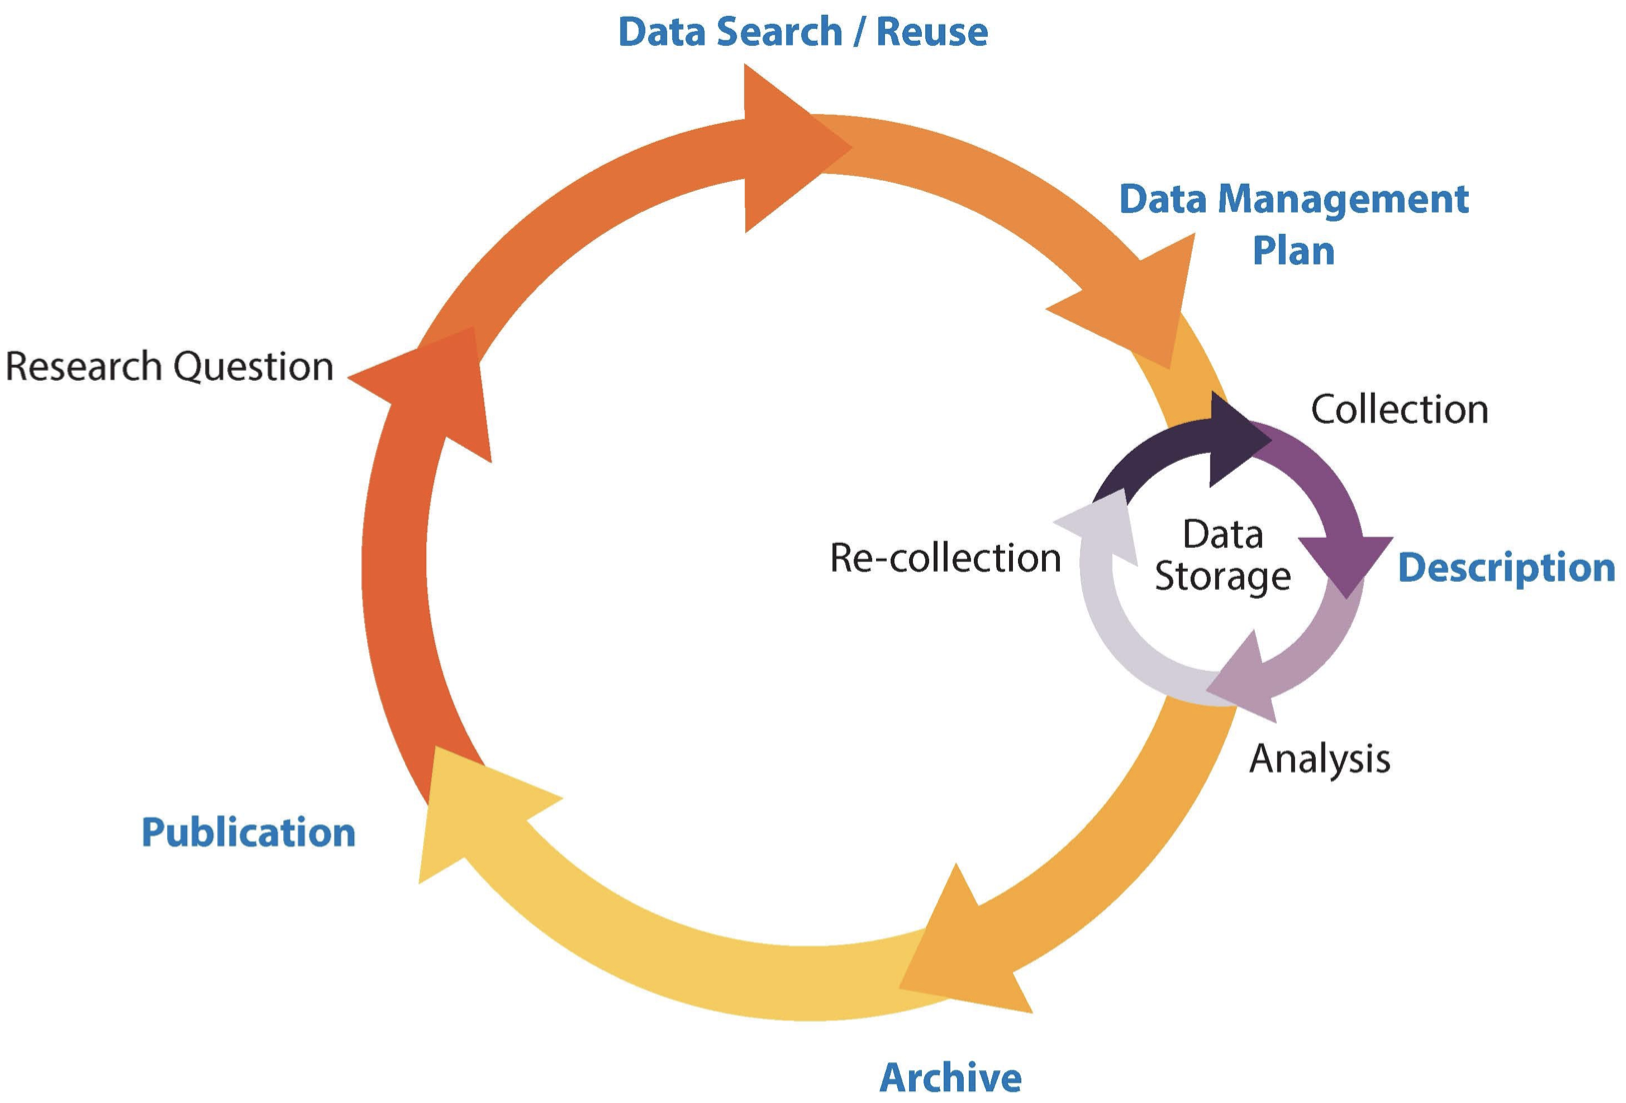 Phases of the research process in a circular shape. A smaller circular process naming the DMP processes.